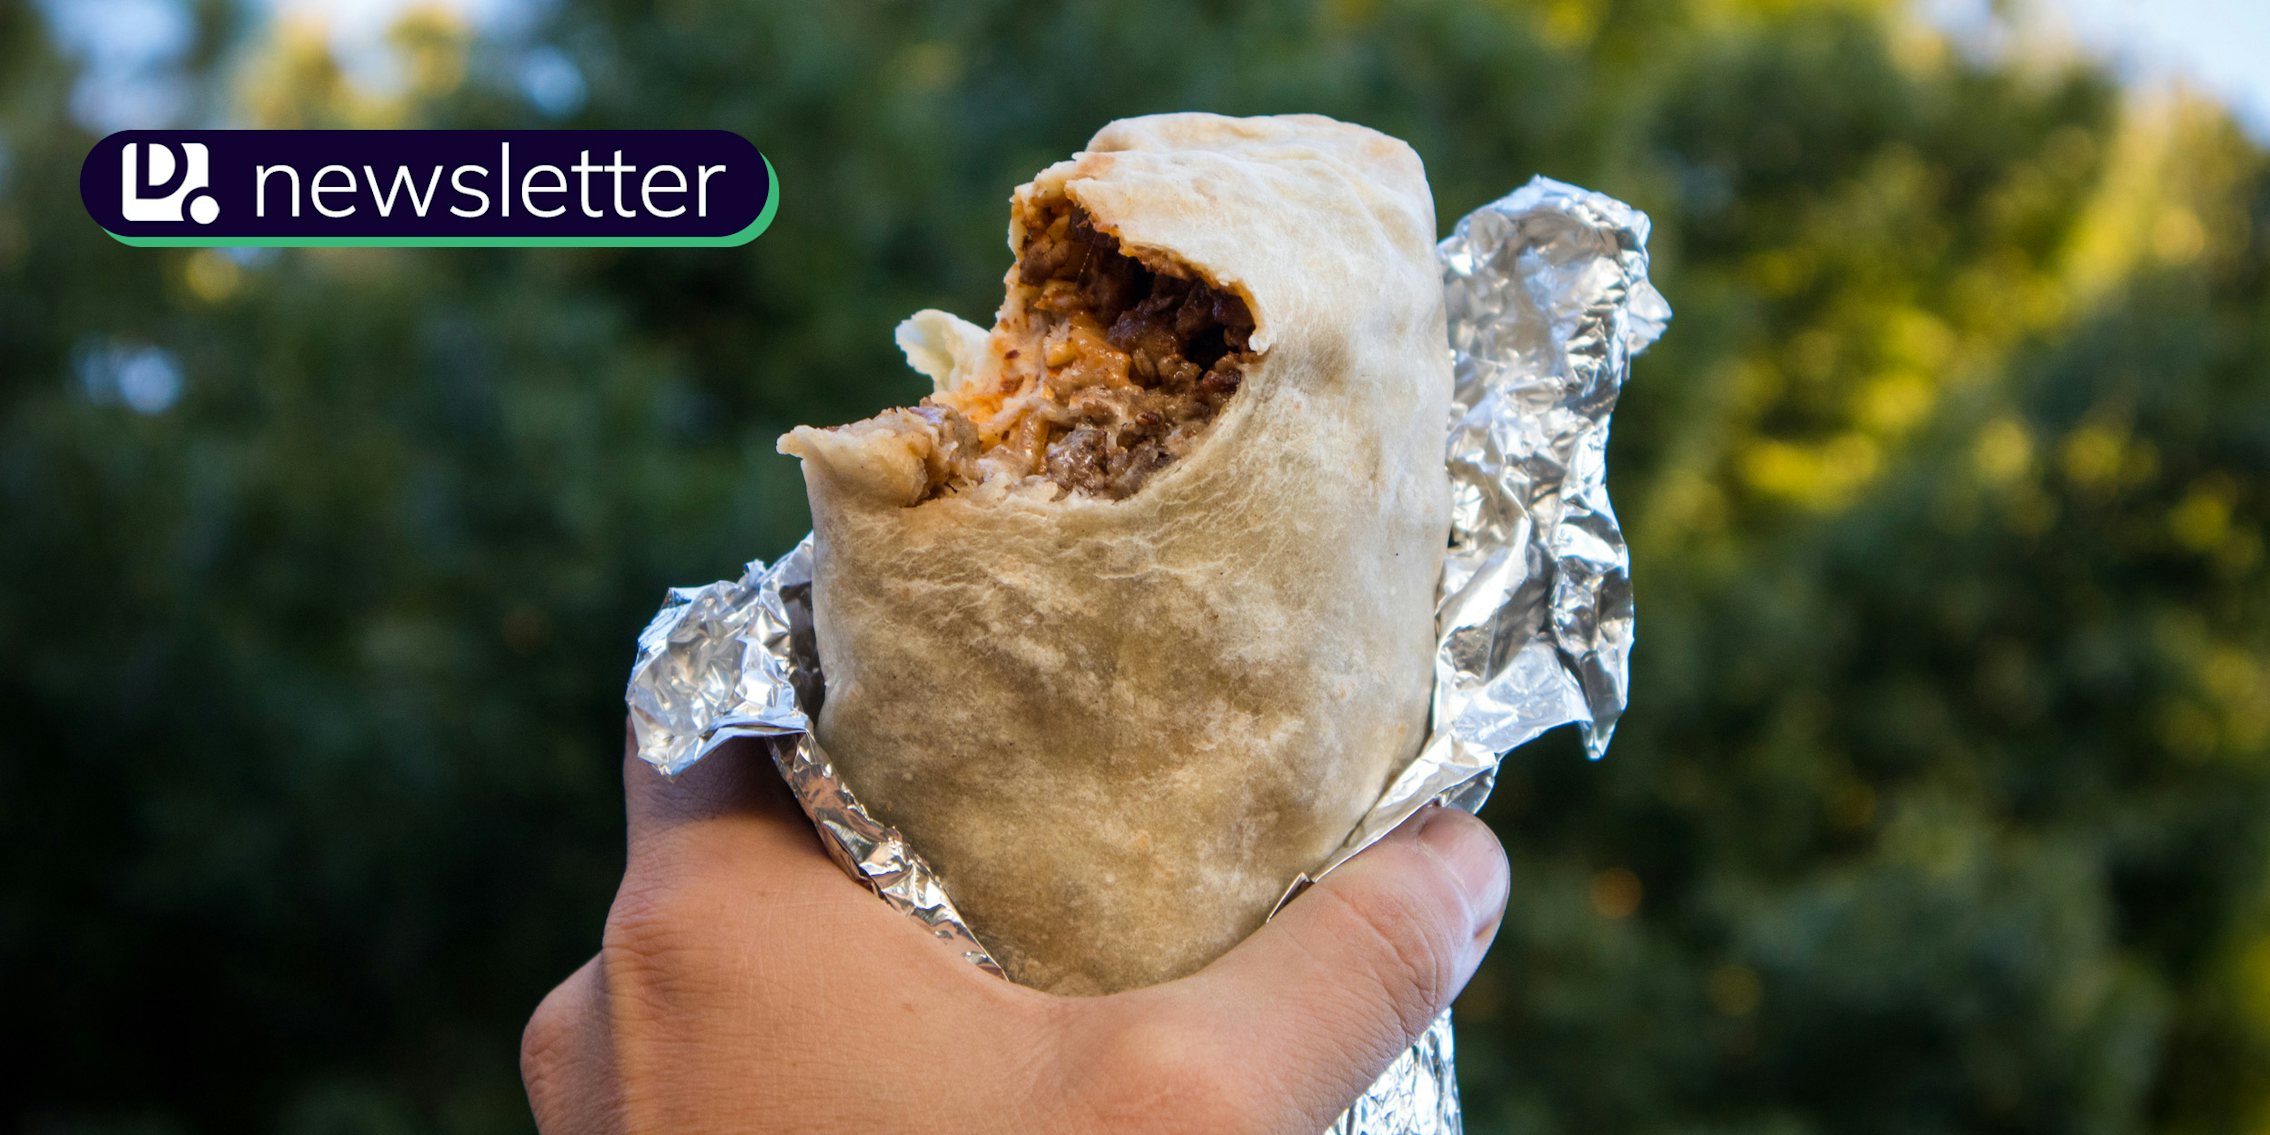 A hand holding a burrito. The Daily Dot newsletter logo is in the top left corner.